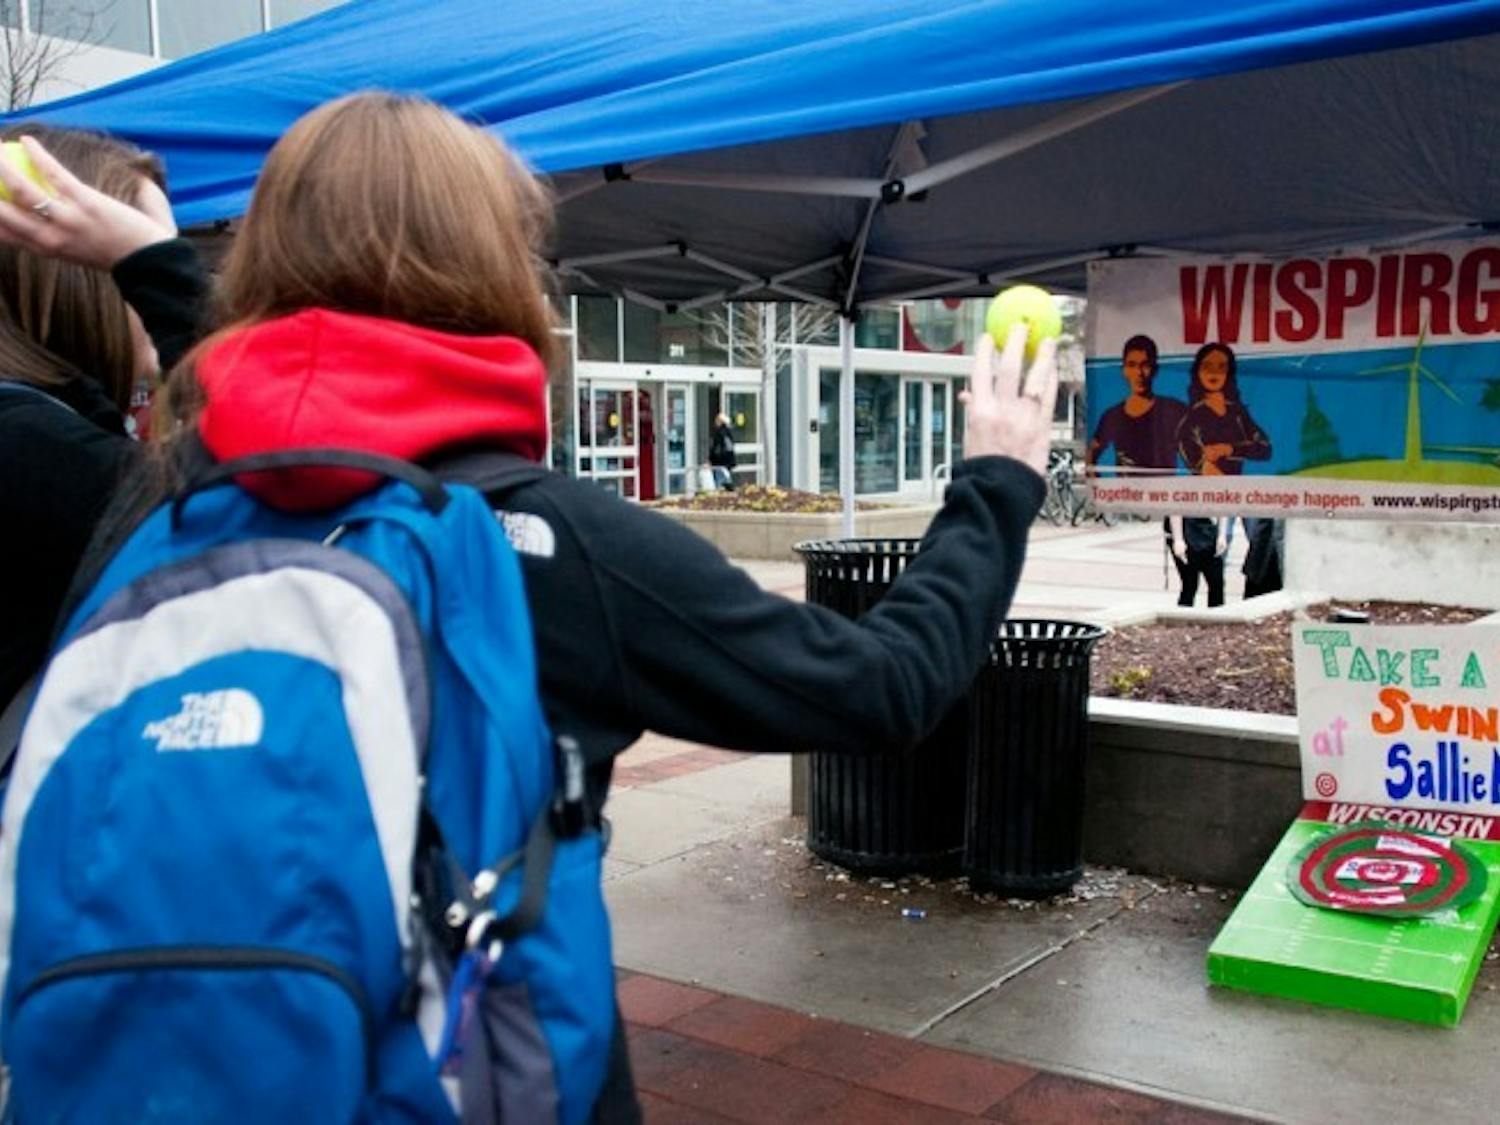 WISPIRG seeks student support for bill that may increase financial aid